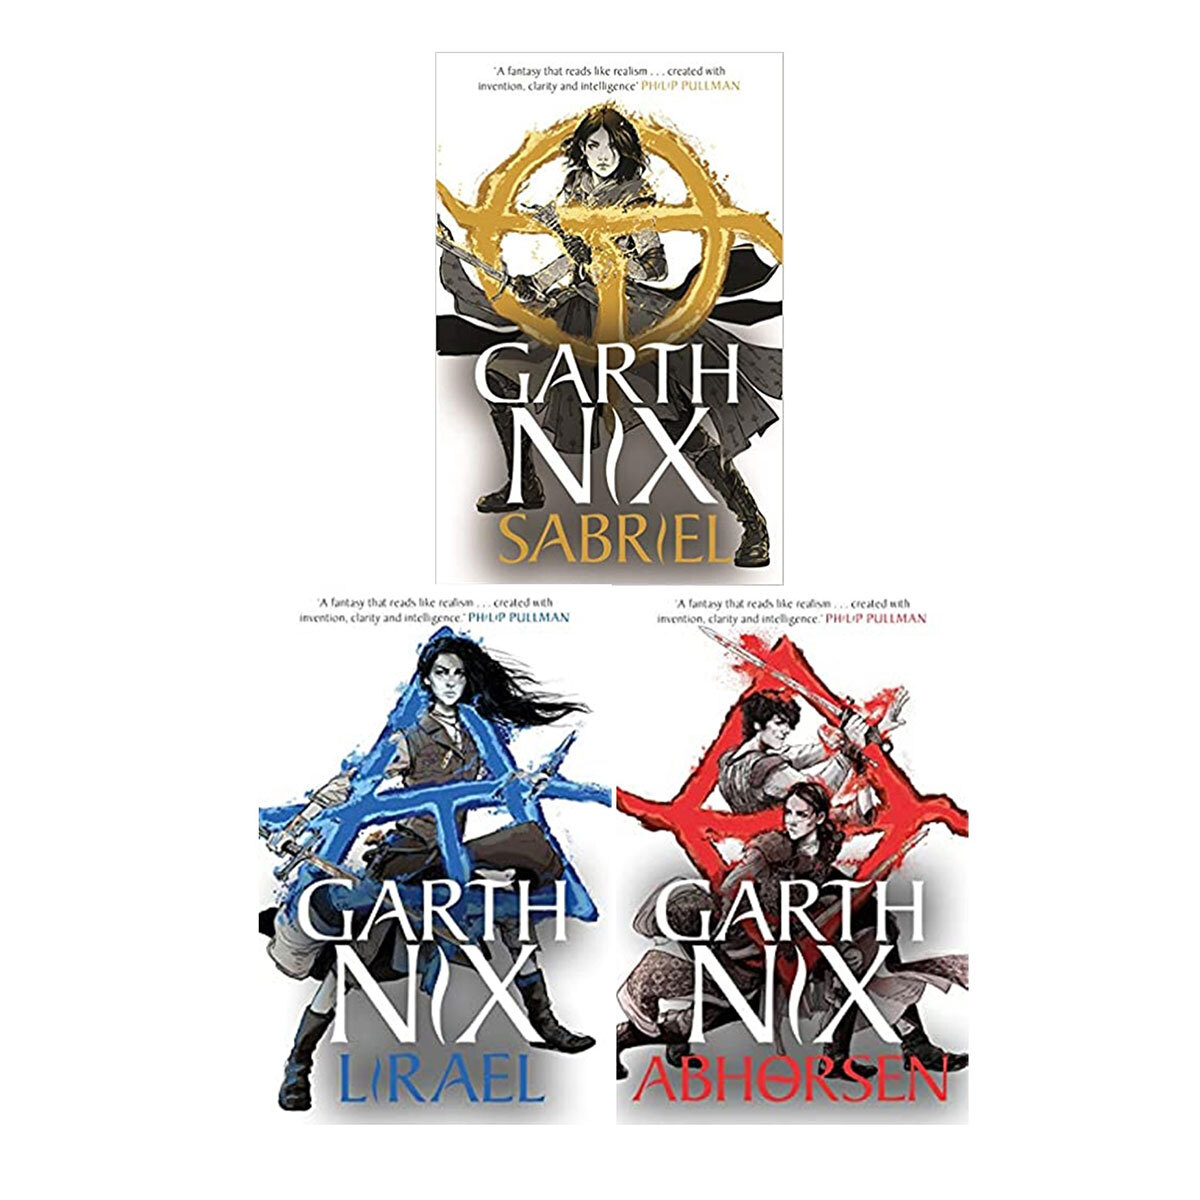 Image of all 3 books